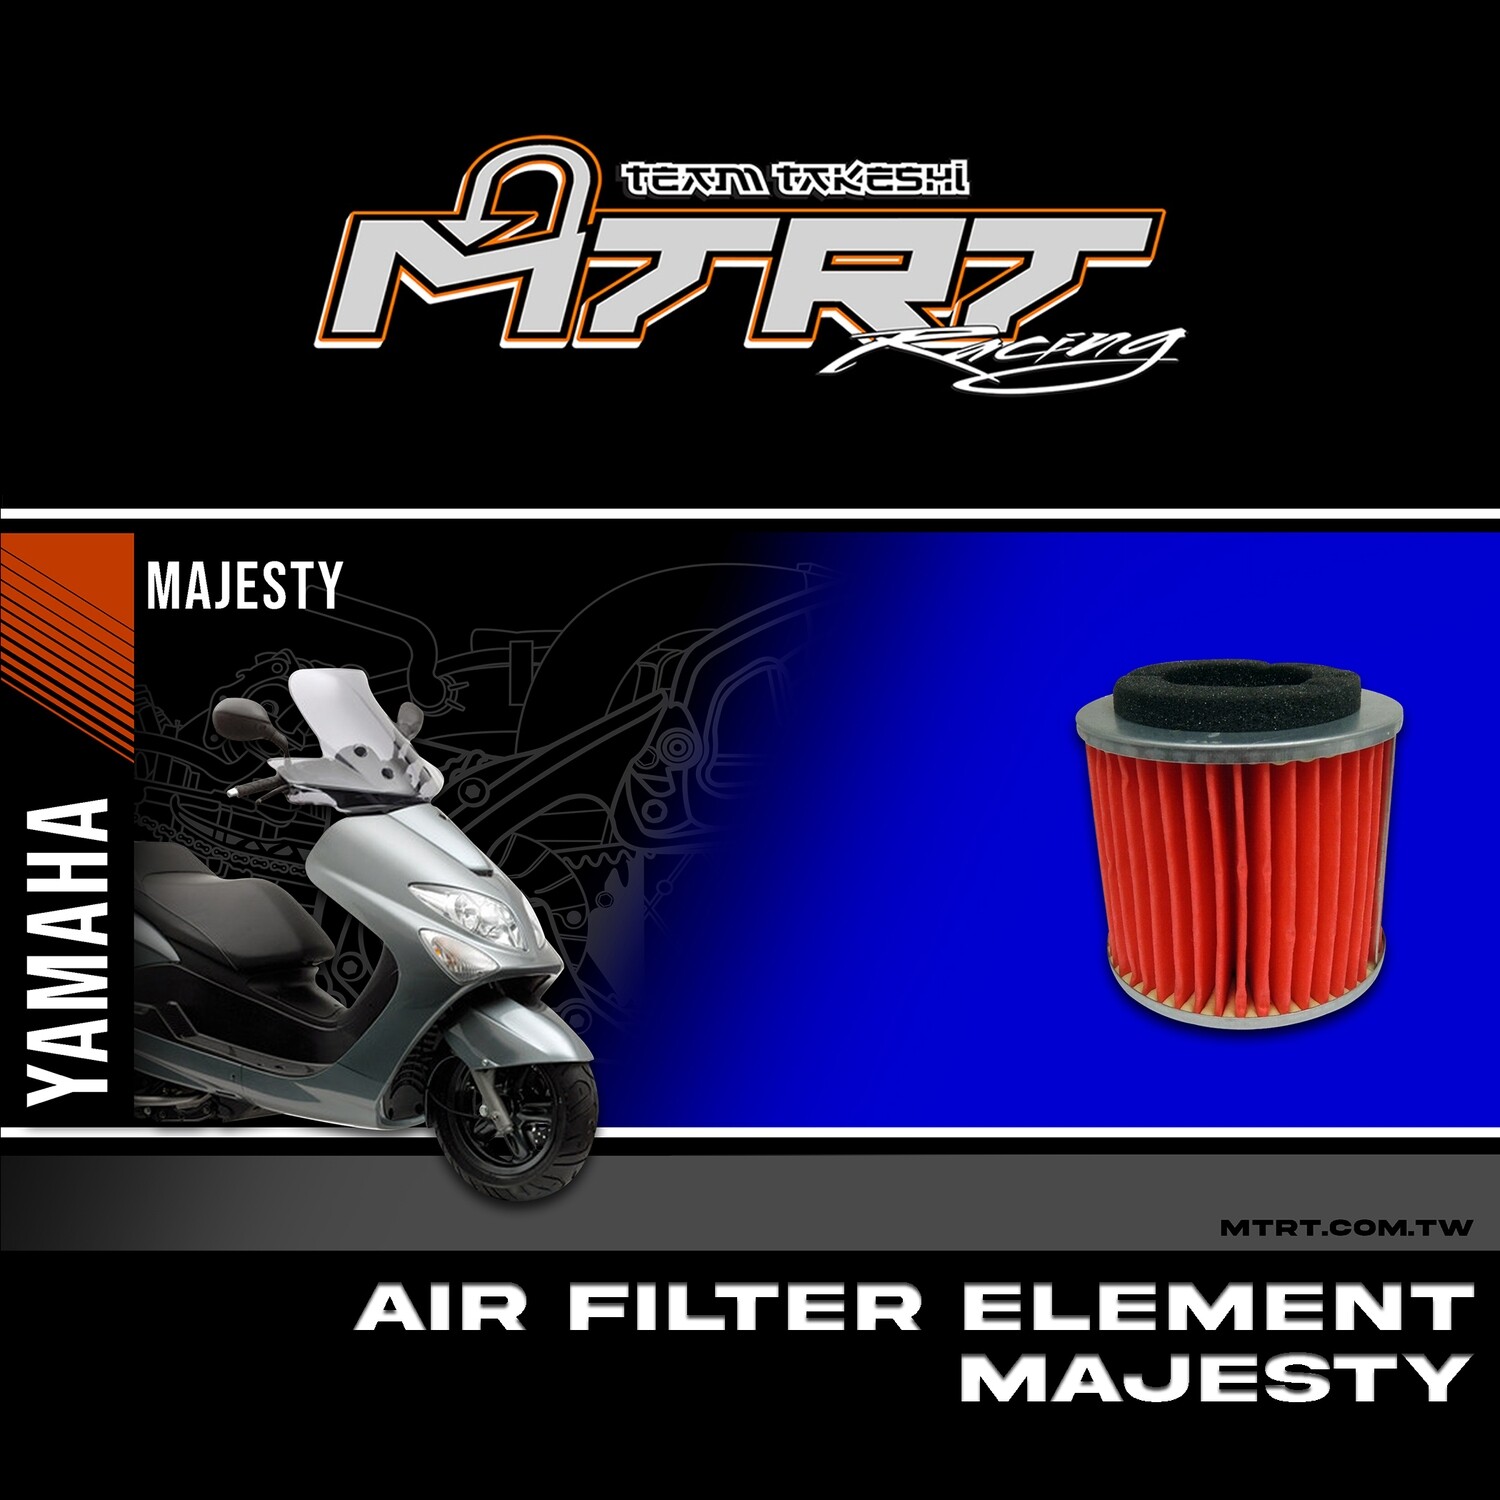 AIR FILTER ELEMENT FUZZY-MAJESTY-SVMAX DS